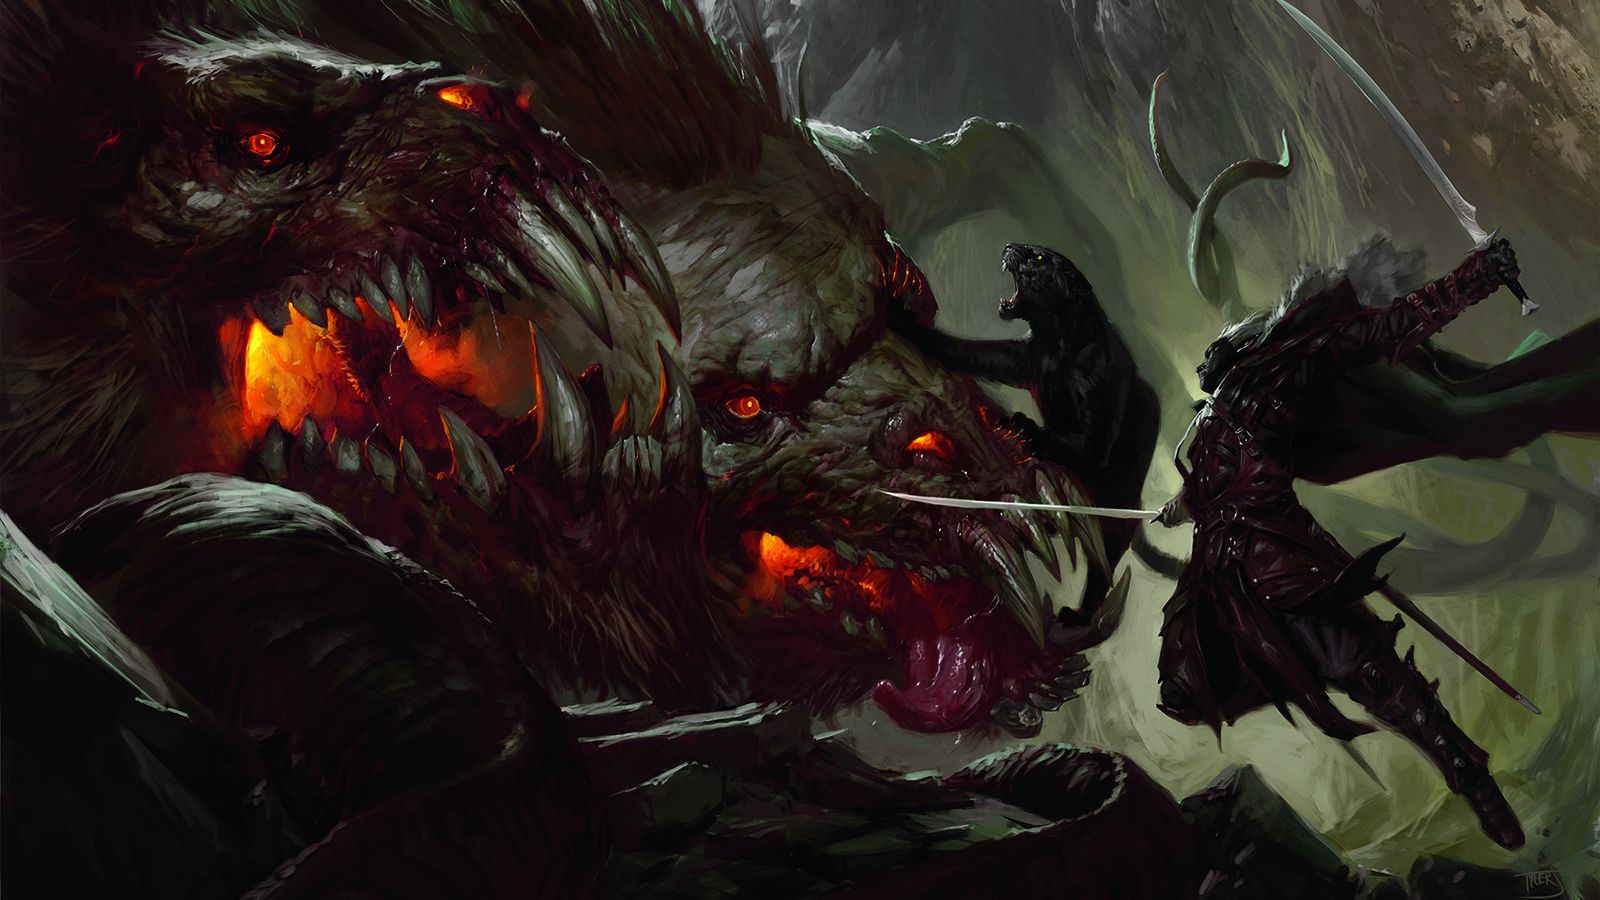 D&D's new storyline brings Drizzt back to the forefront - Po